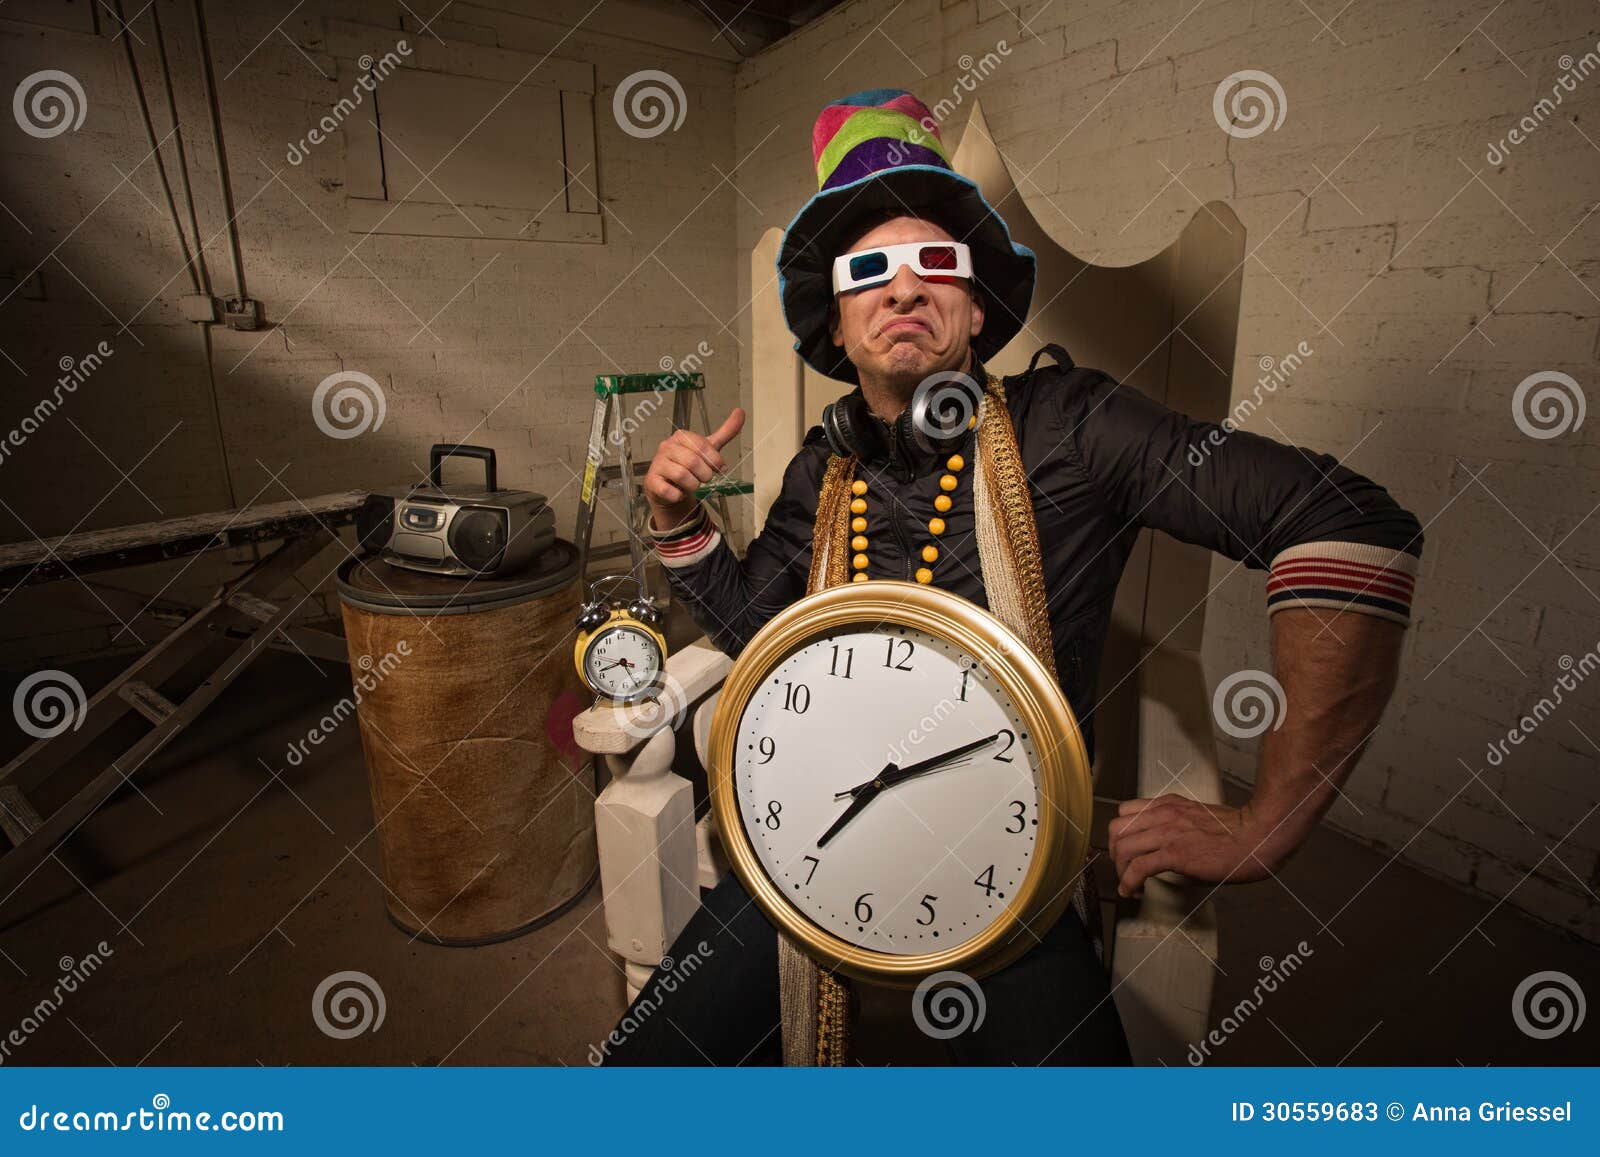 rapper with big clock necklace